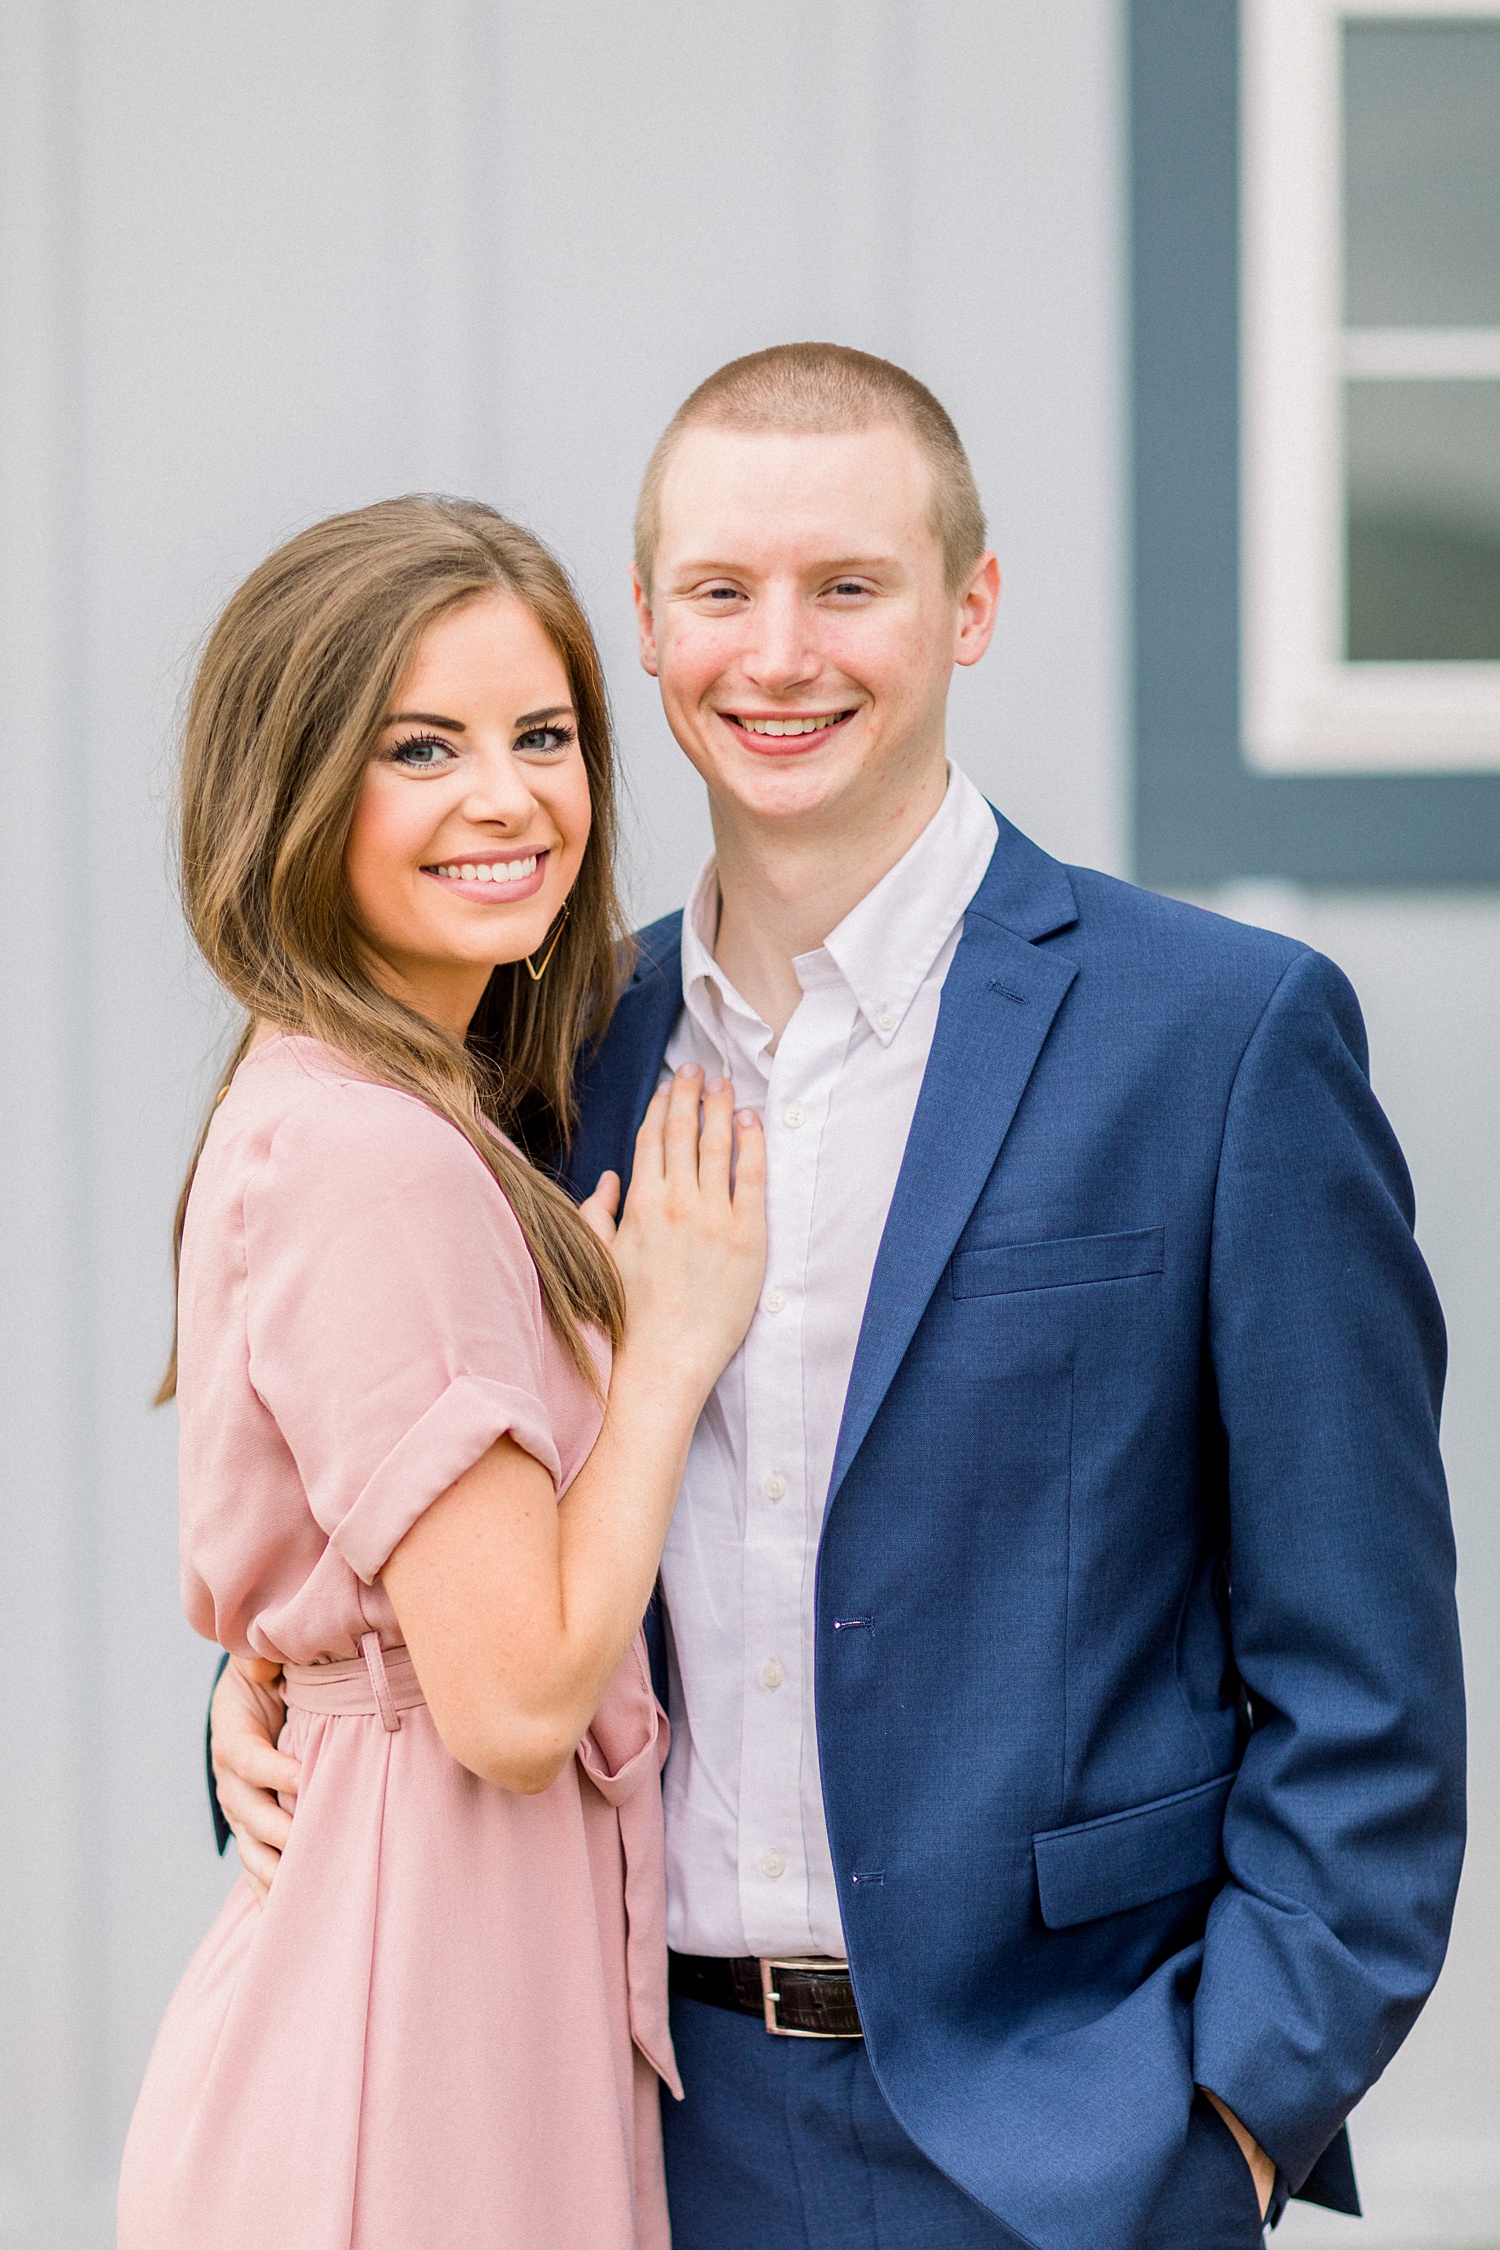 engaged couple poses by building in Montevallo AL